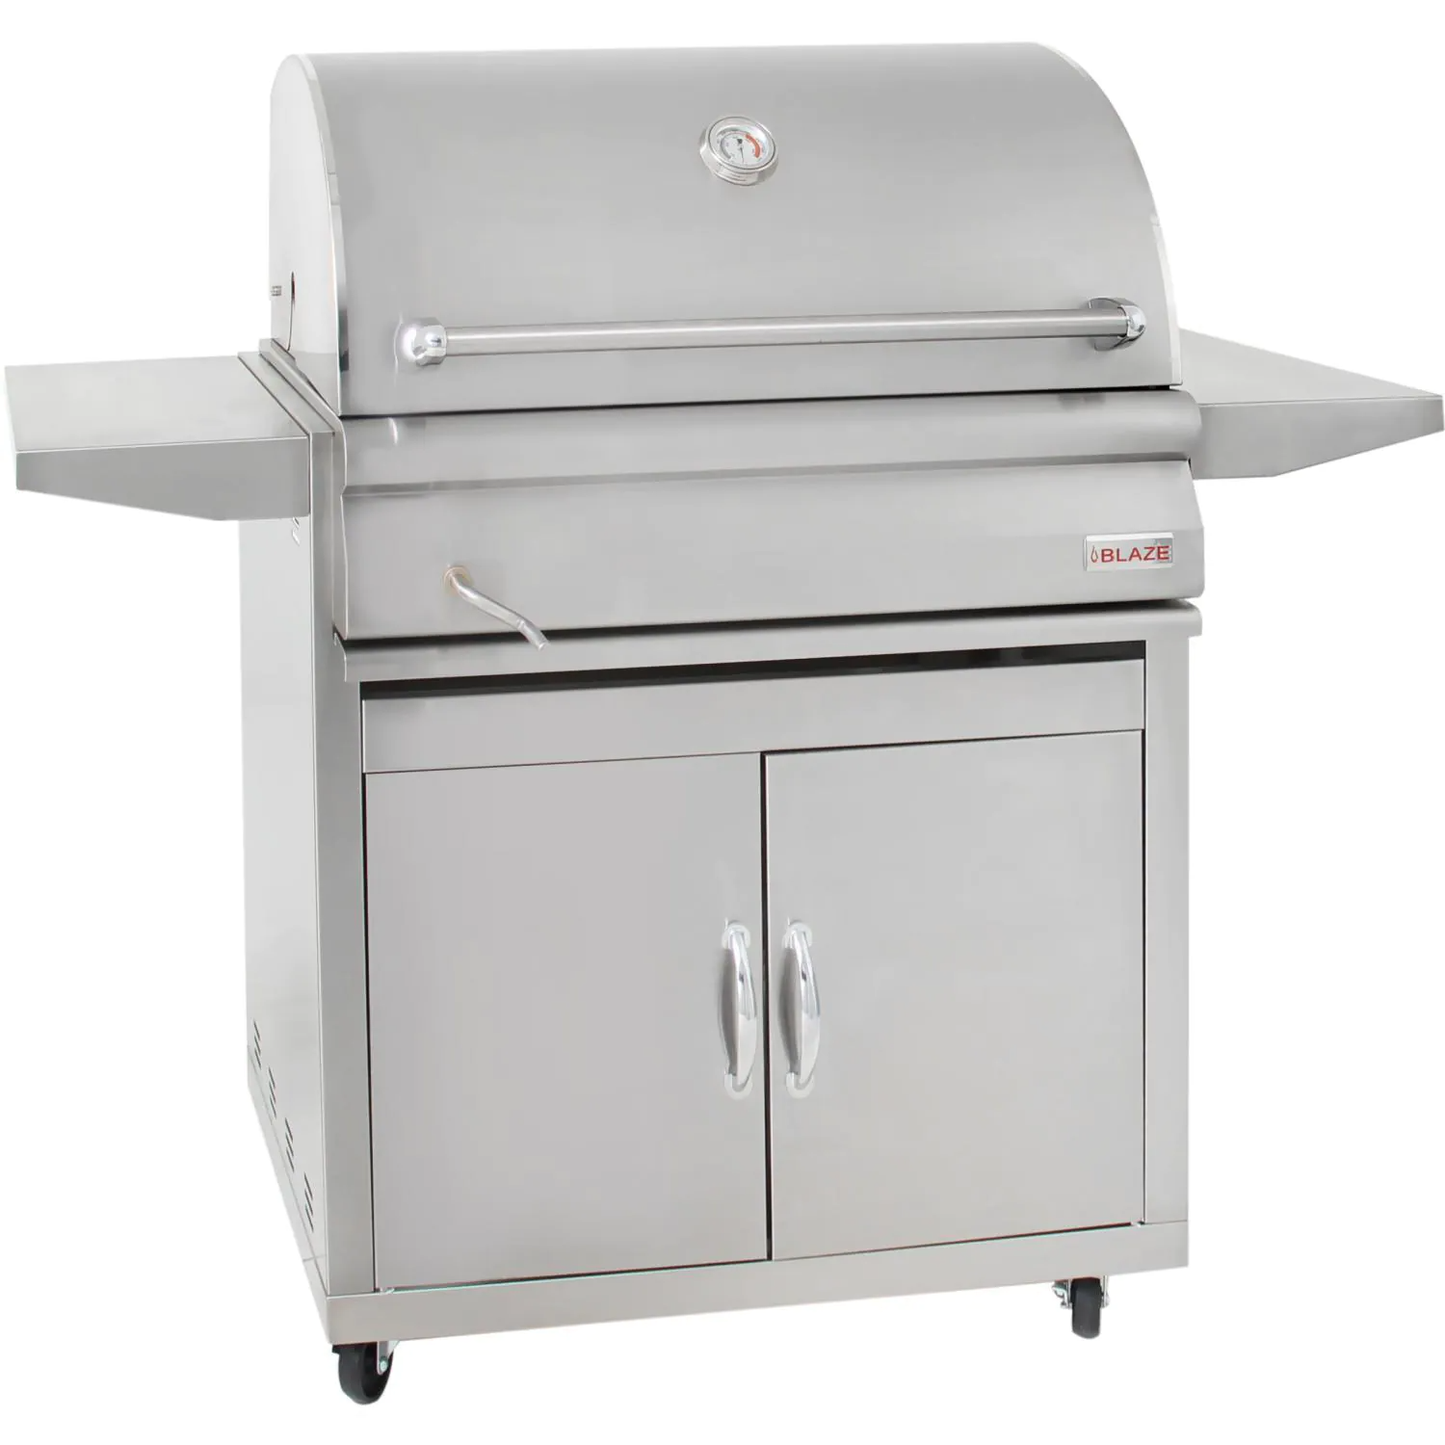 Blaze 32" Charcoal Grill With Adjustable Charcoal Tray